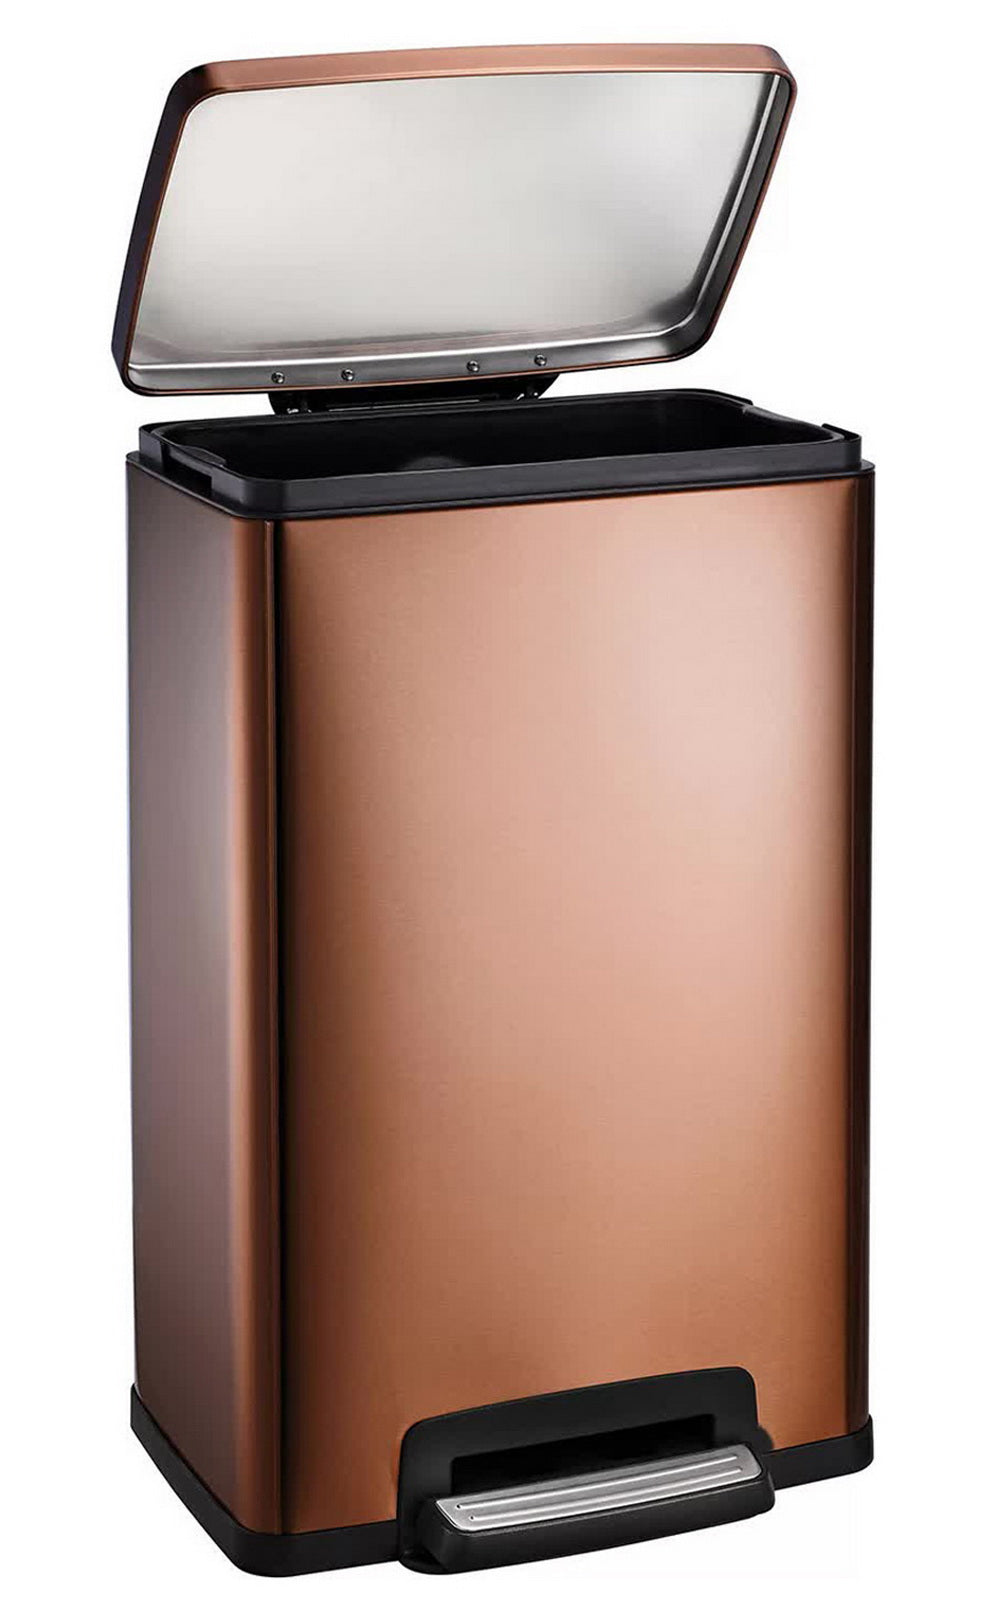 Stainless Steel 13 Gallon Step Trash Can Tramontina Garbage Bin Plastic Liner